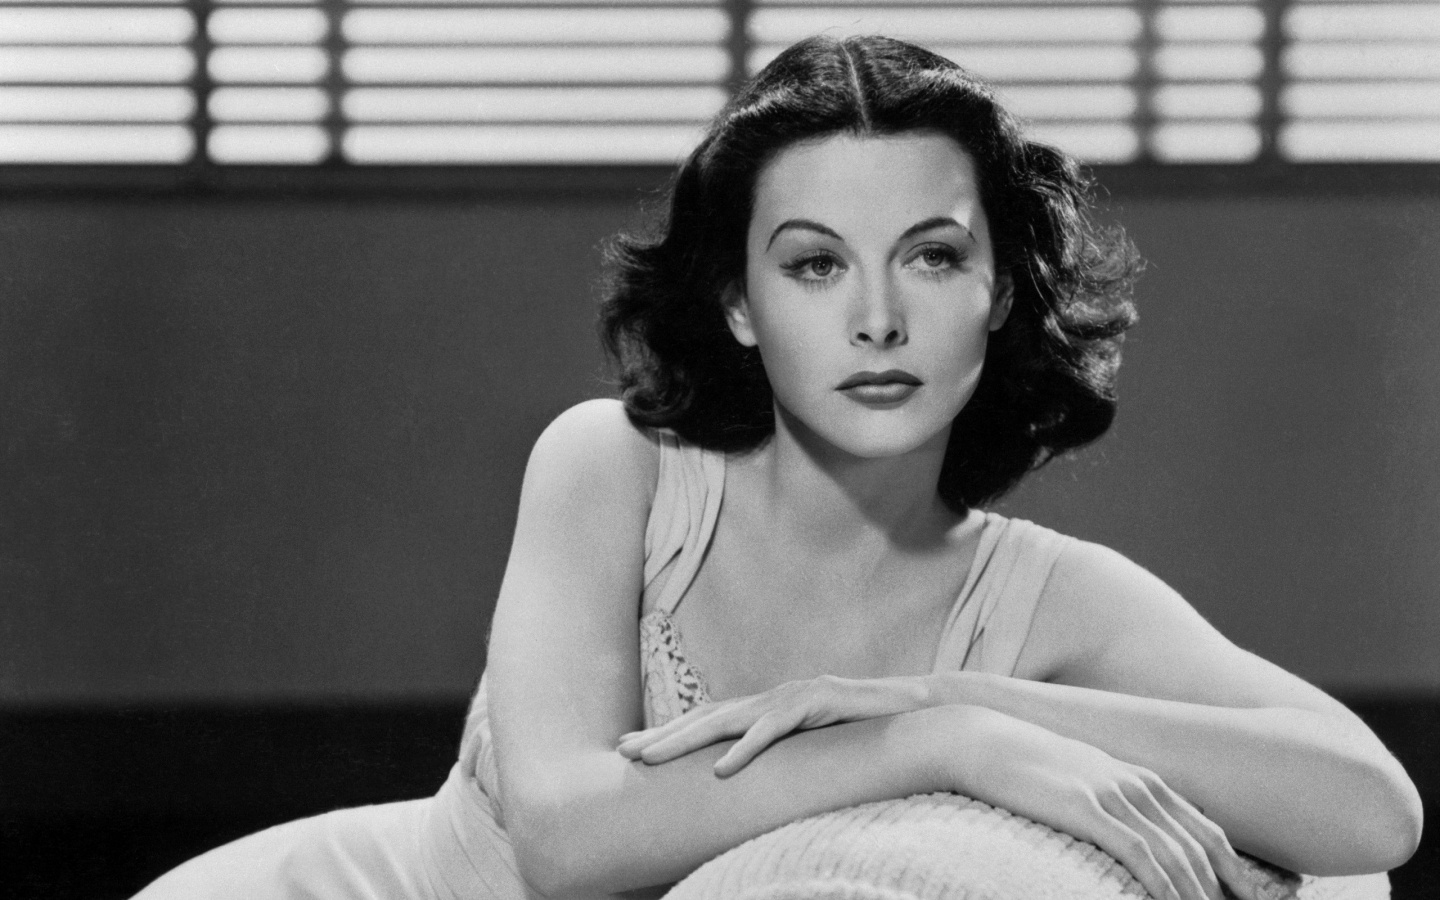 Podcast science 129 – Hedy Lamarr